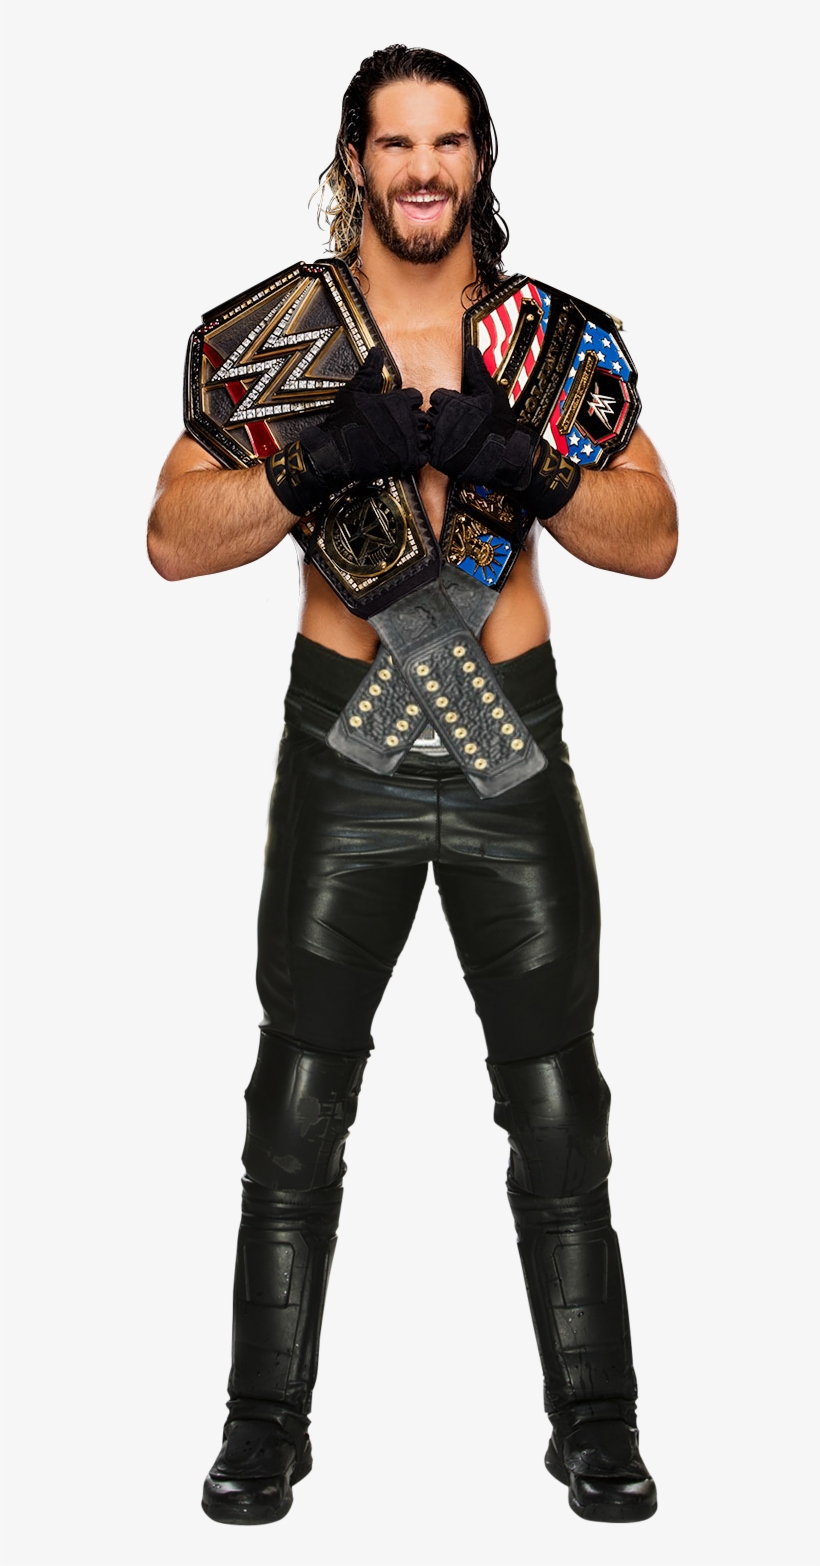 I Just Hope He Properly Re-habs This Time And We Can - Dean Ambrose 2016 World Heavyweight Champion, transparent png #1809289